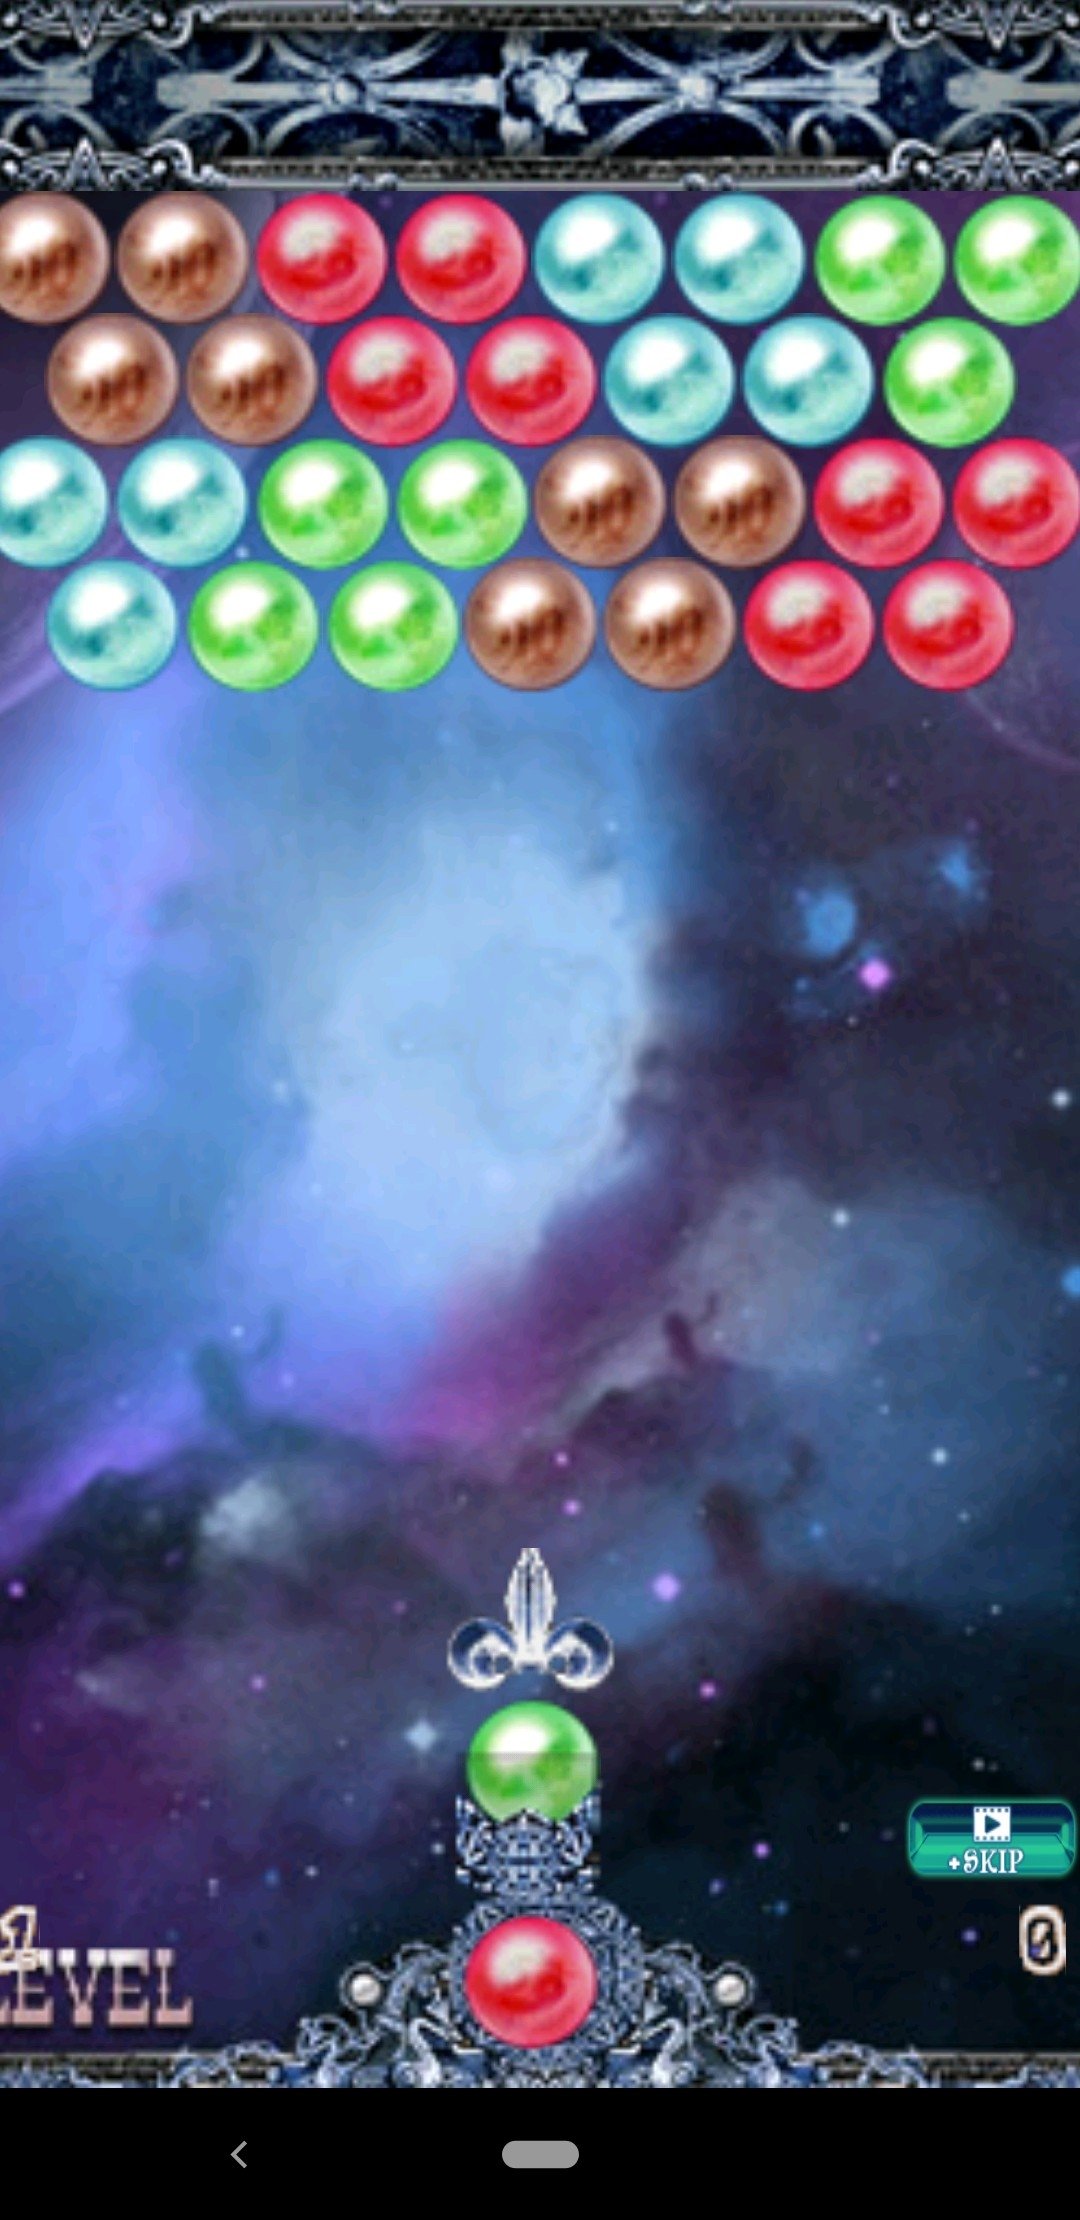 Shoot Bubble APK Download for Android Free